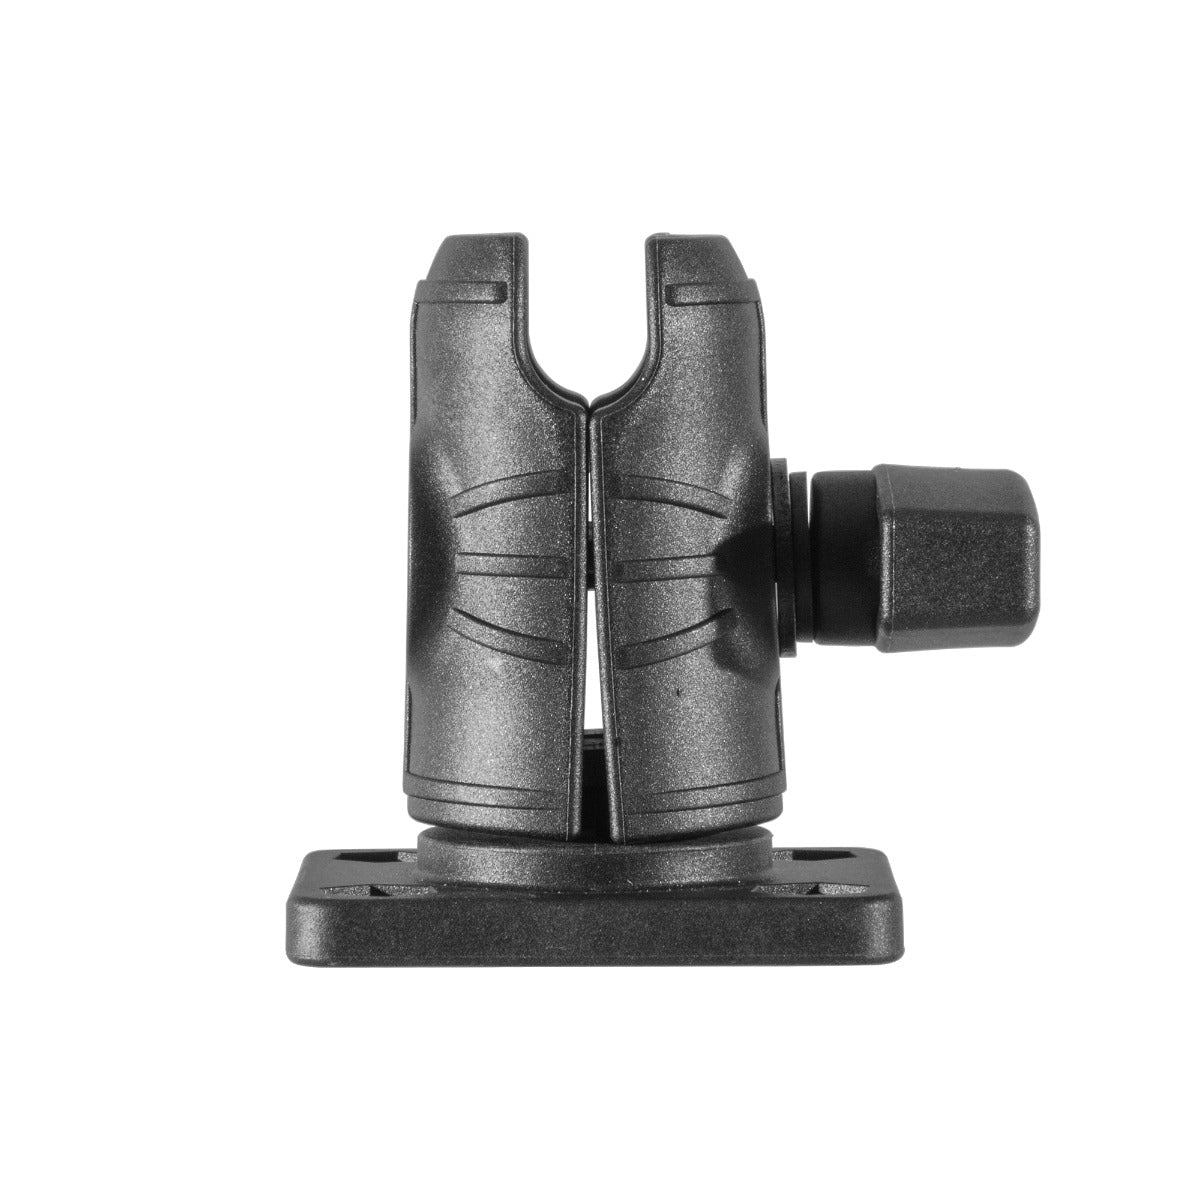 iBOLT Composite 2.5" Open Socket AMPS Drill Base Mount for 1-inch/ 25mm Ball Joints